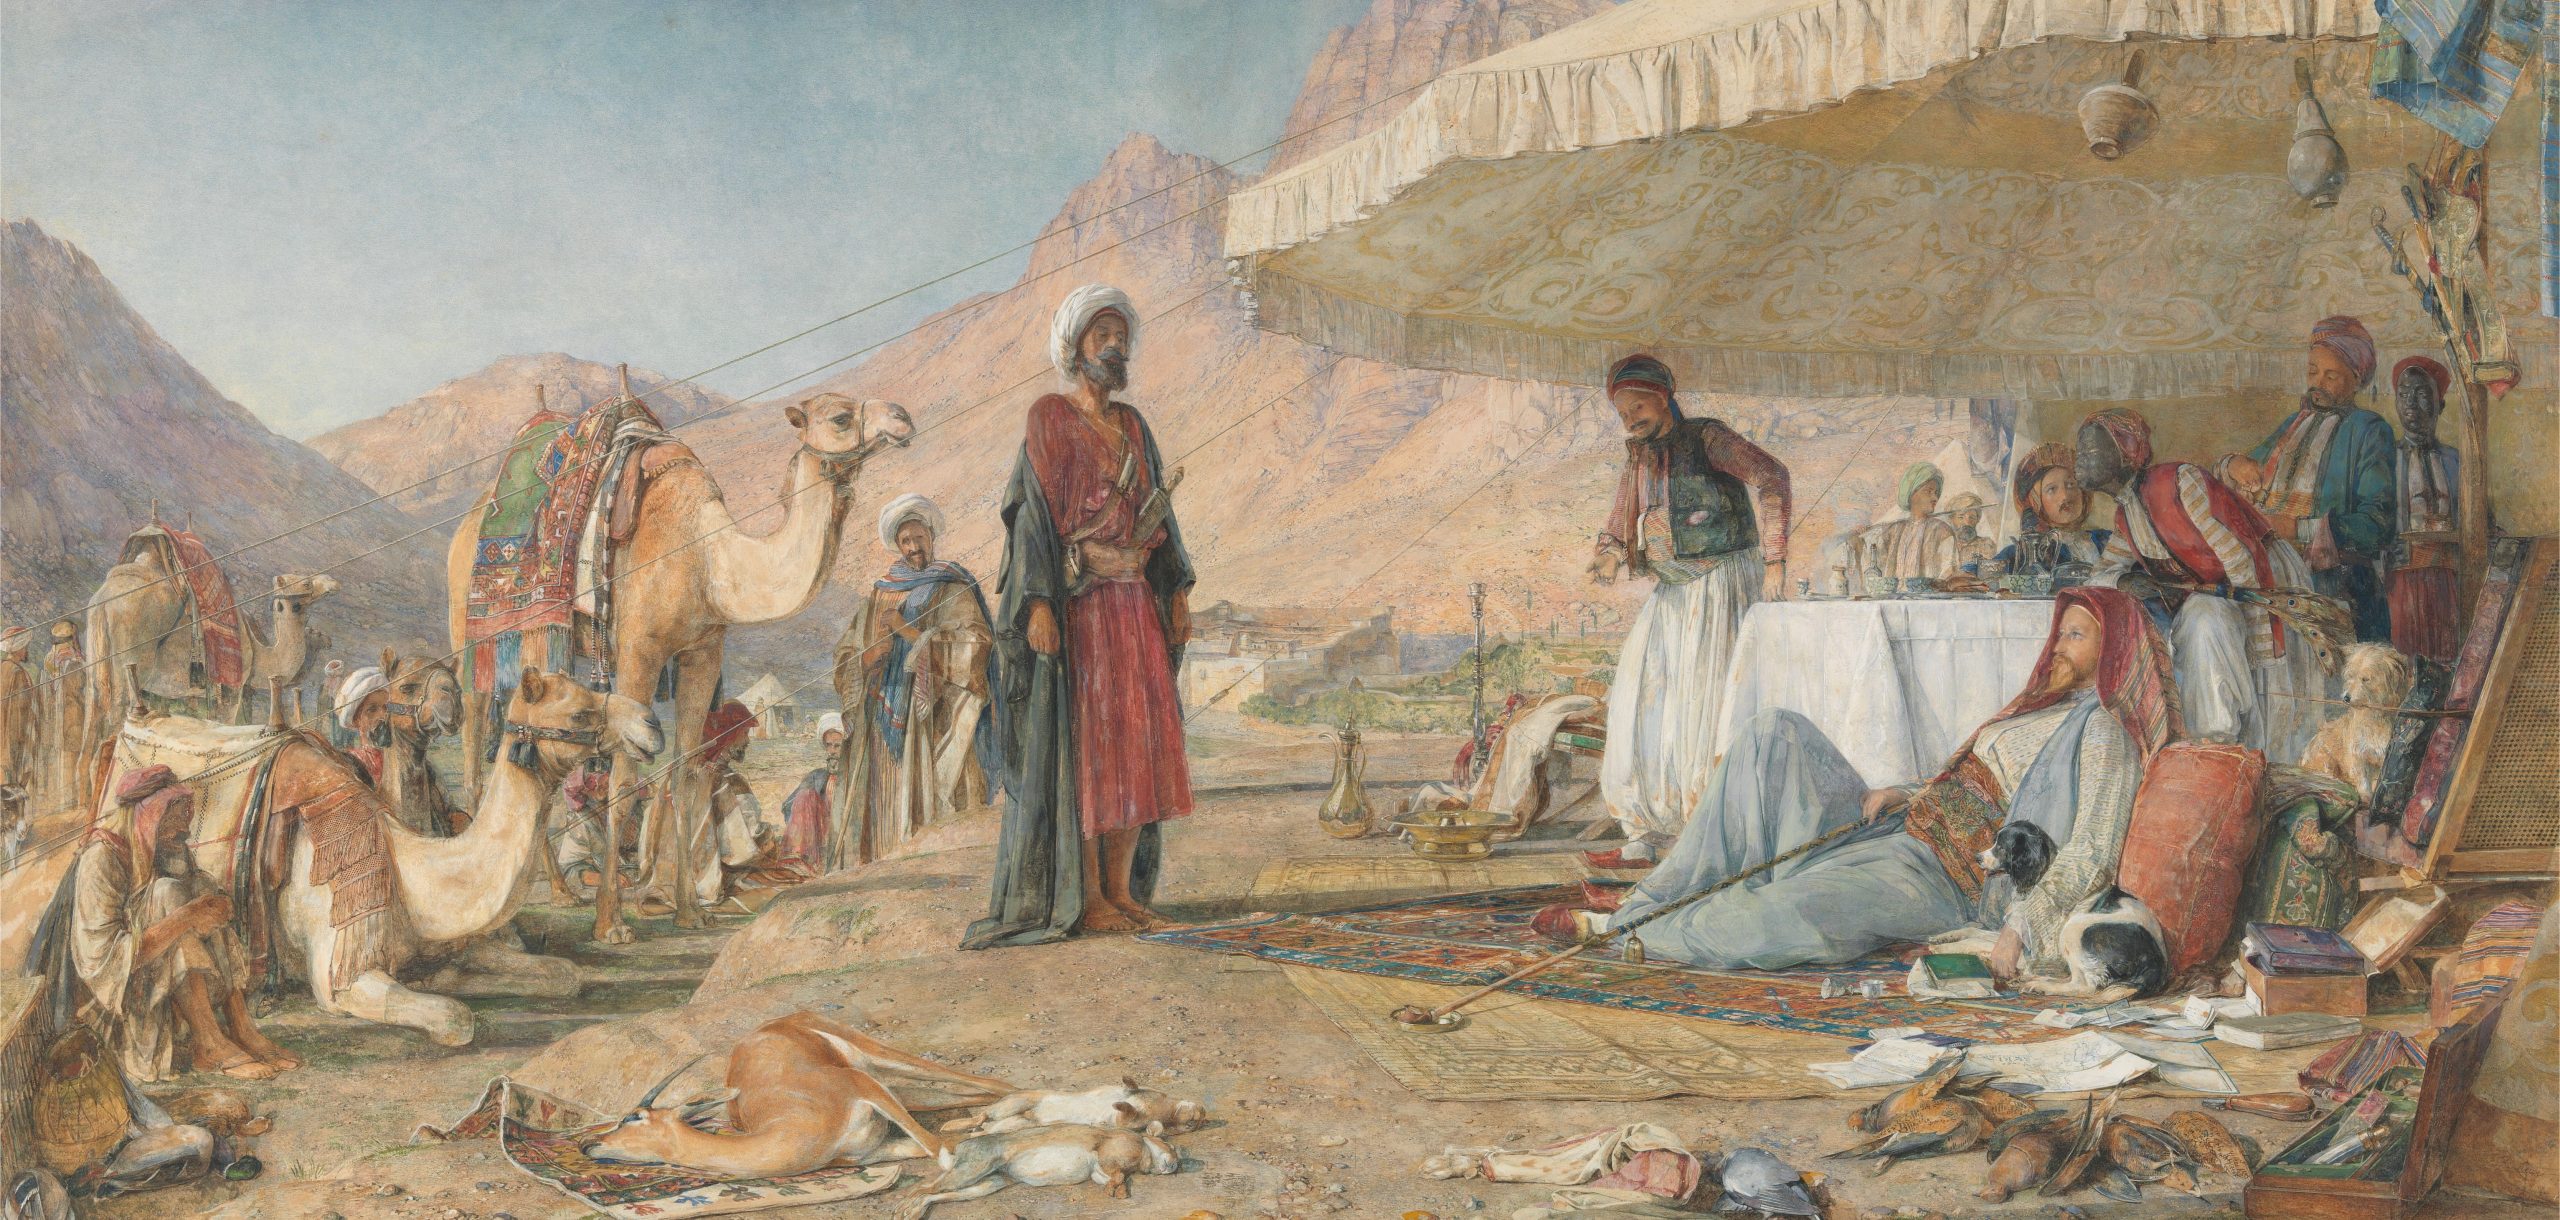 A man stands to confront another man who lies on the ground surrounded by civilians and camels in a mountainous landscape.